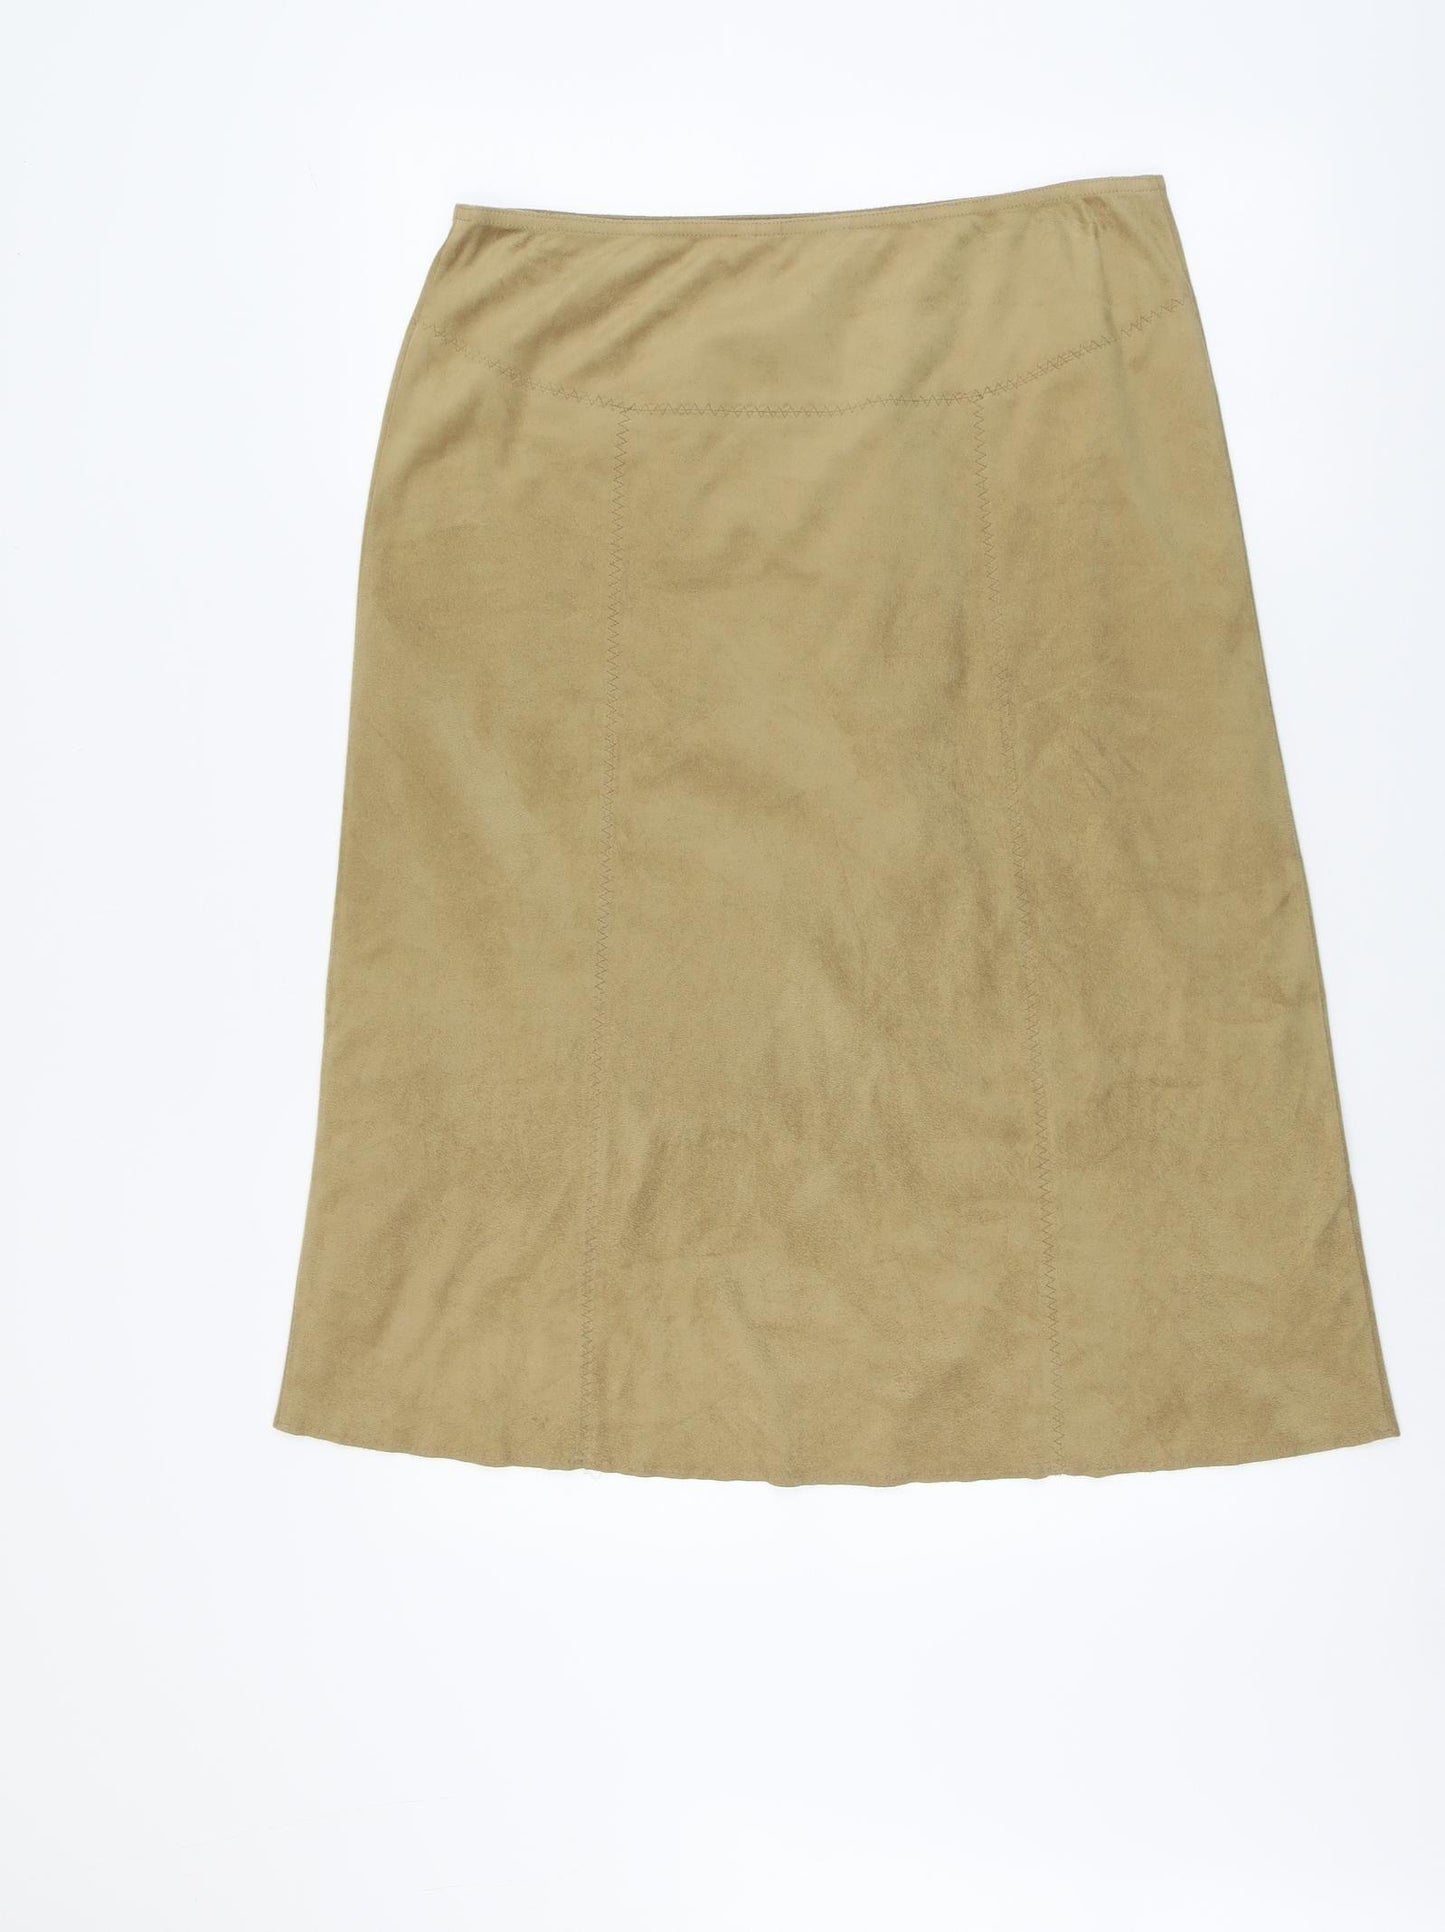 Per Una Womens Beige Polyester A-Line Skirt Size 14